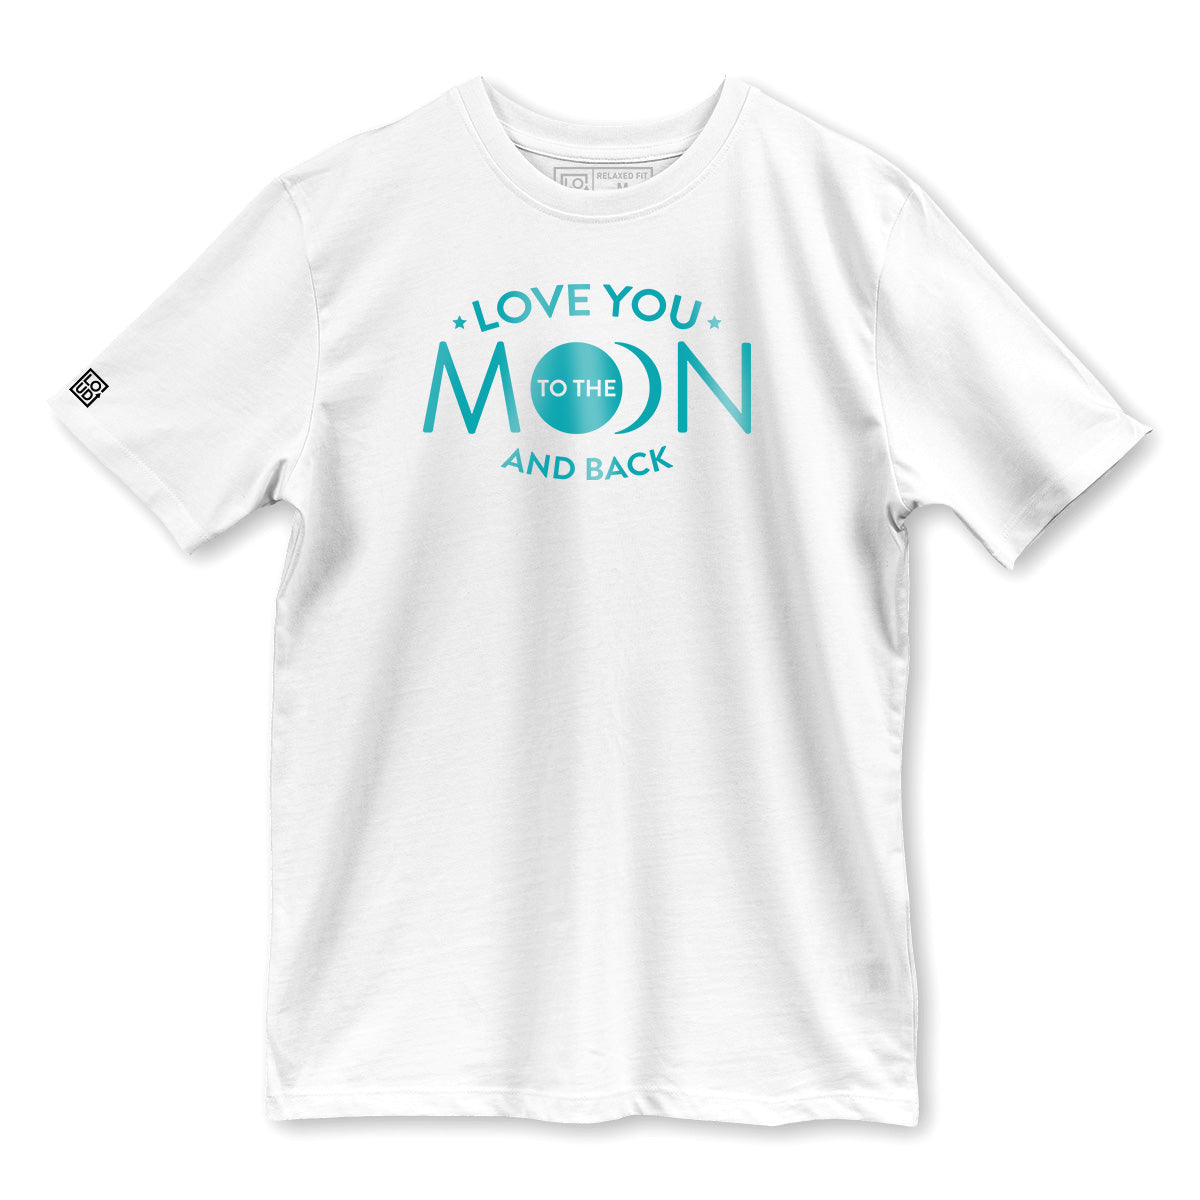 Unisex T-shirt "Love You To The Moon And Back"